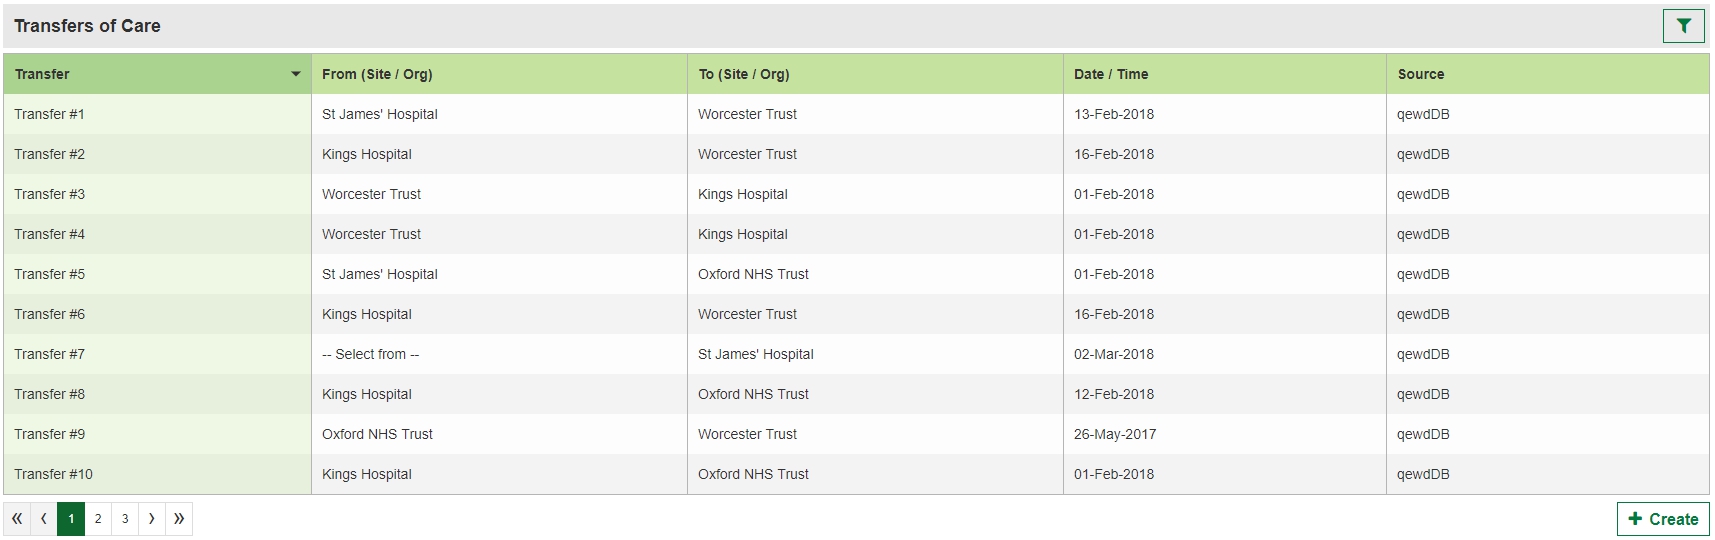 Transfers Of Care list view